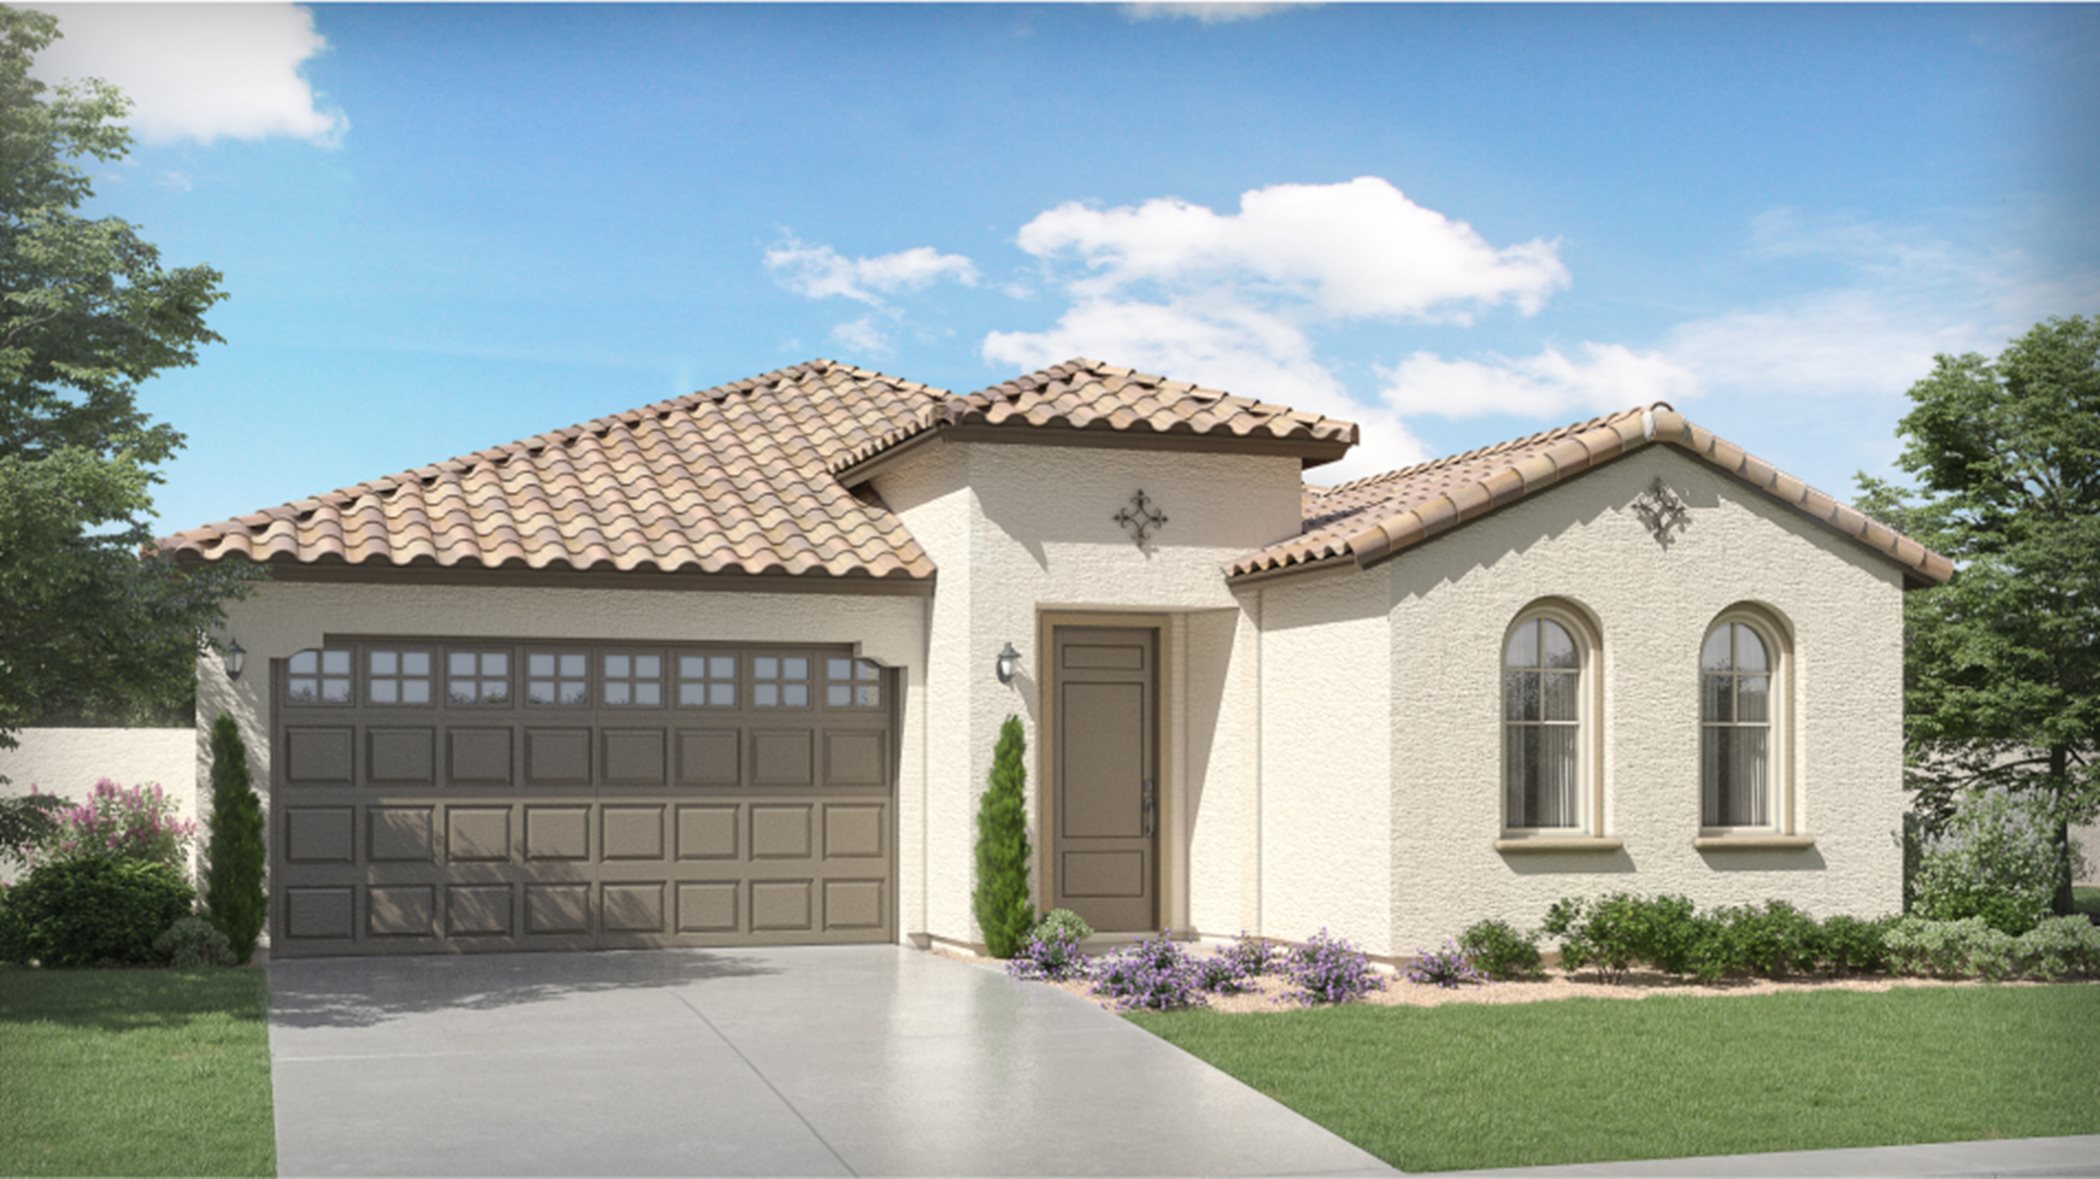 Asher Pointe Signature Sage 4022 Spanish Colonial Exterior A